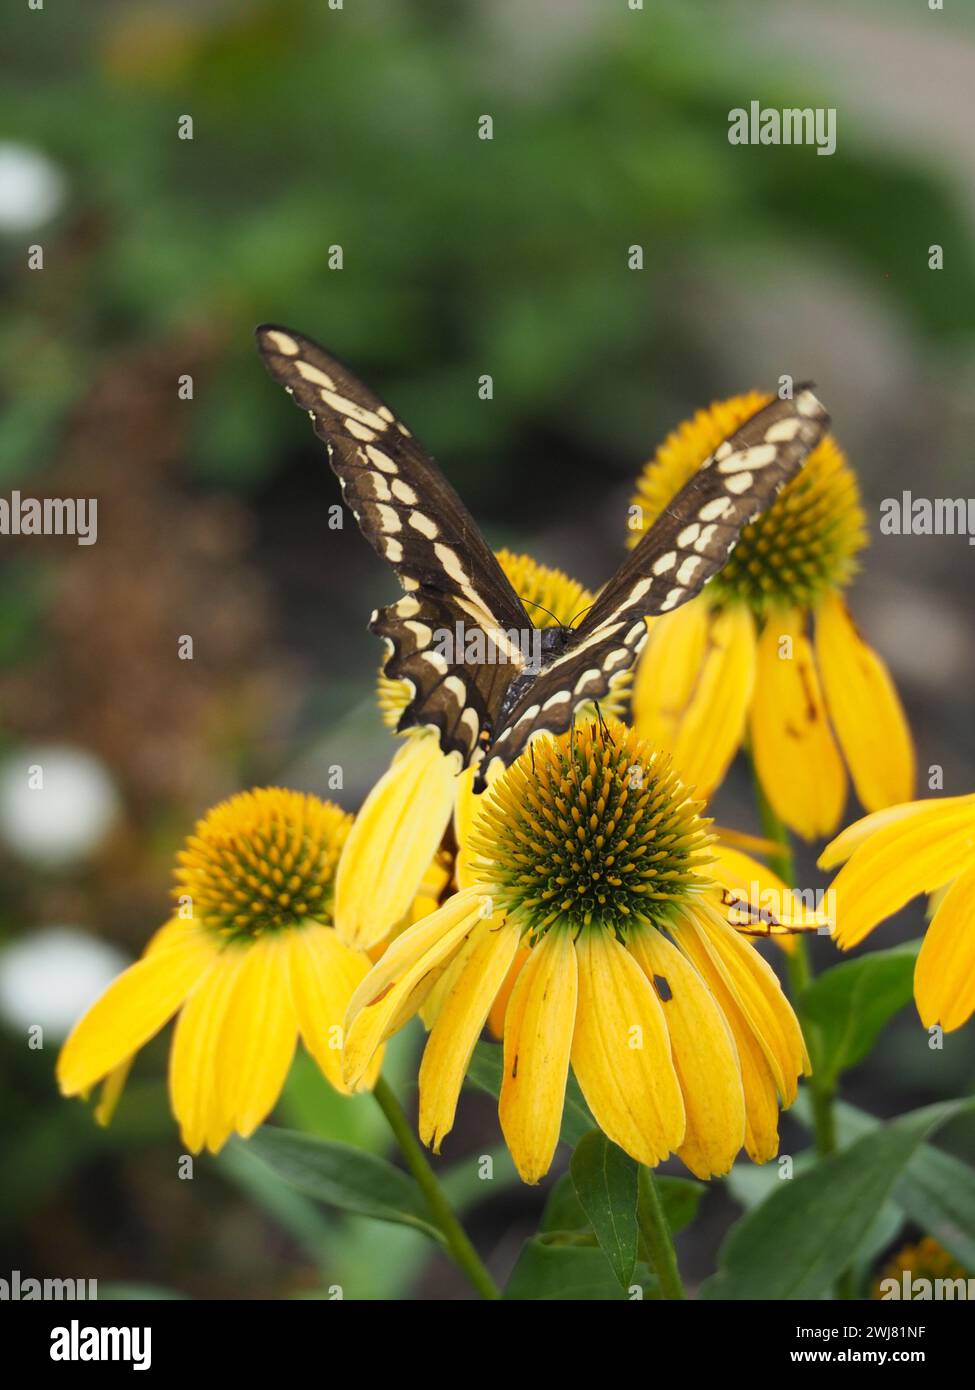 Butterfly perched on vibrant yellow flowers in a garden Stock Photo